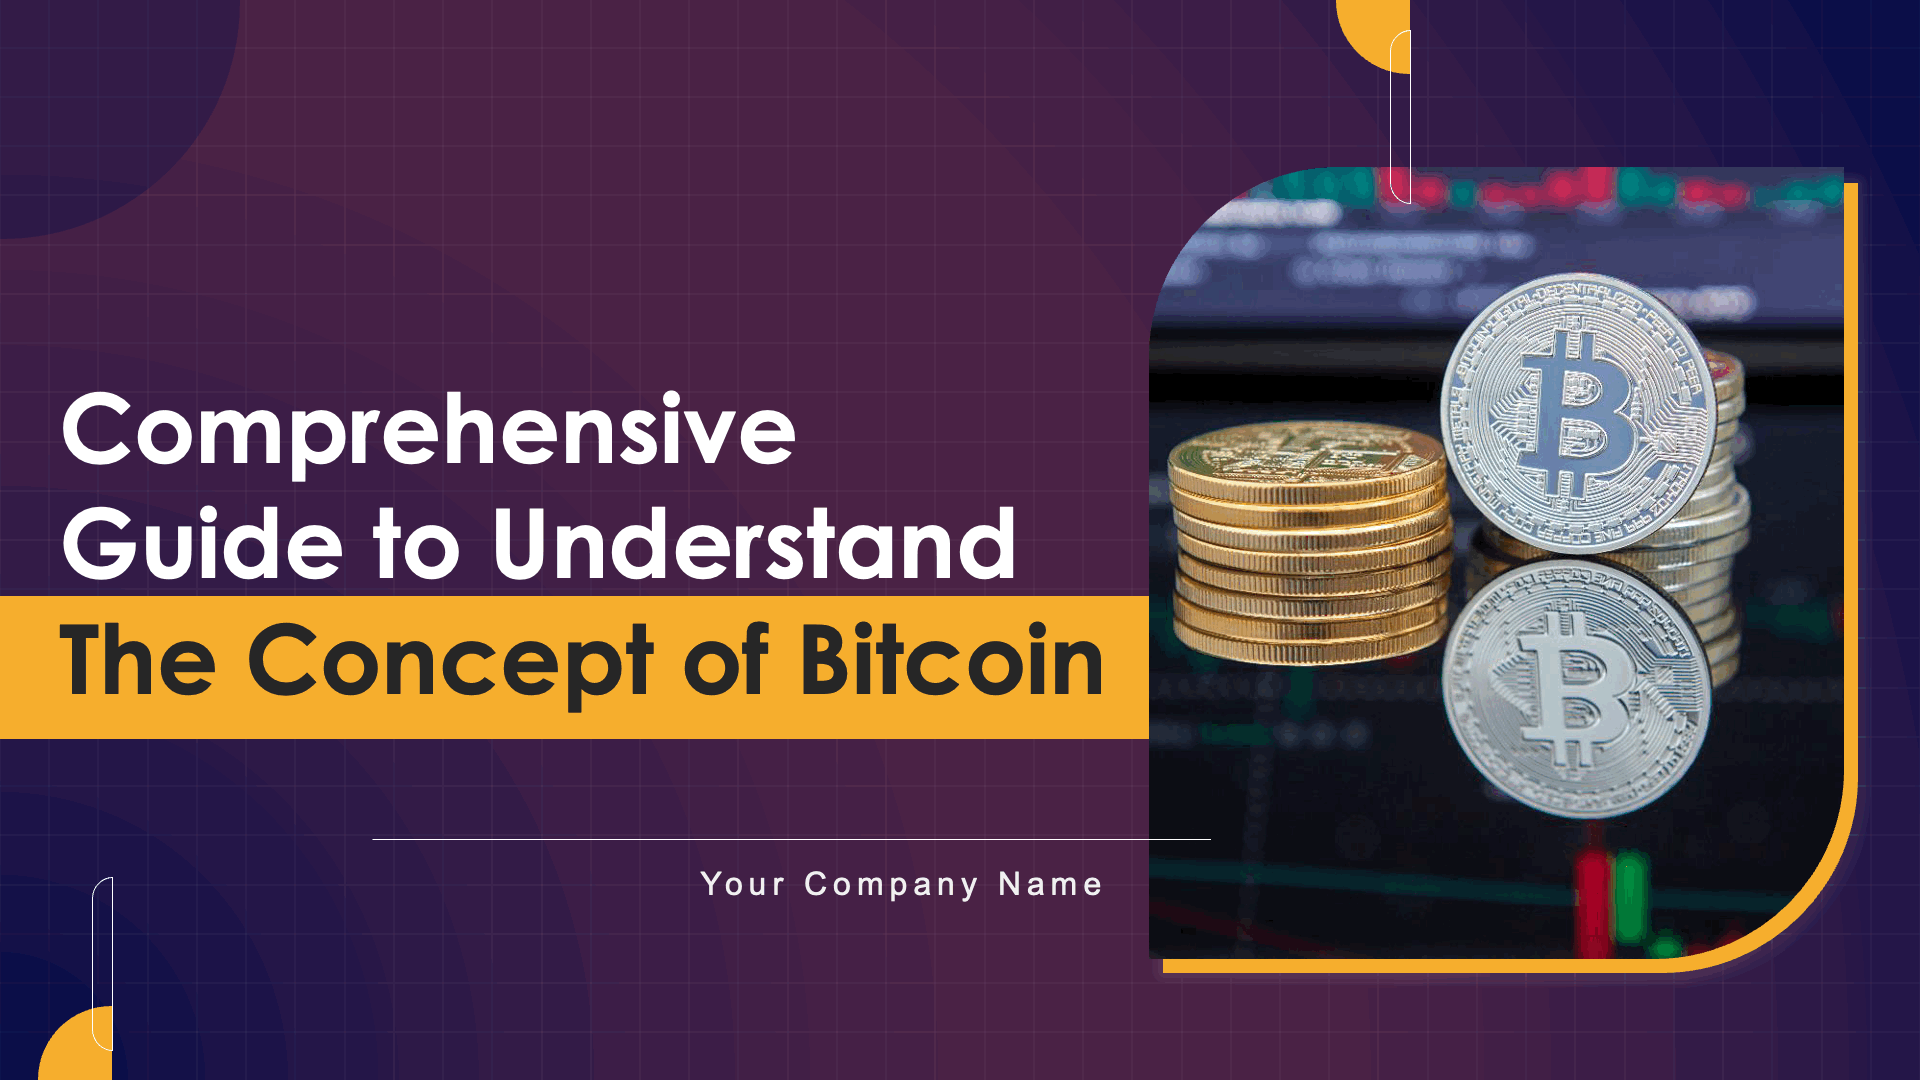 Comprehensive Guide to Understand The Concept of Bitcoin